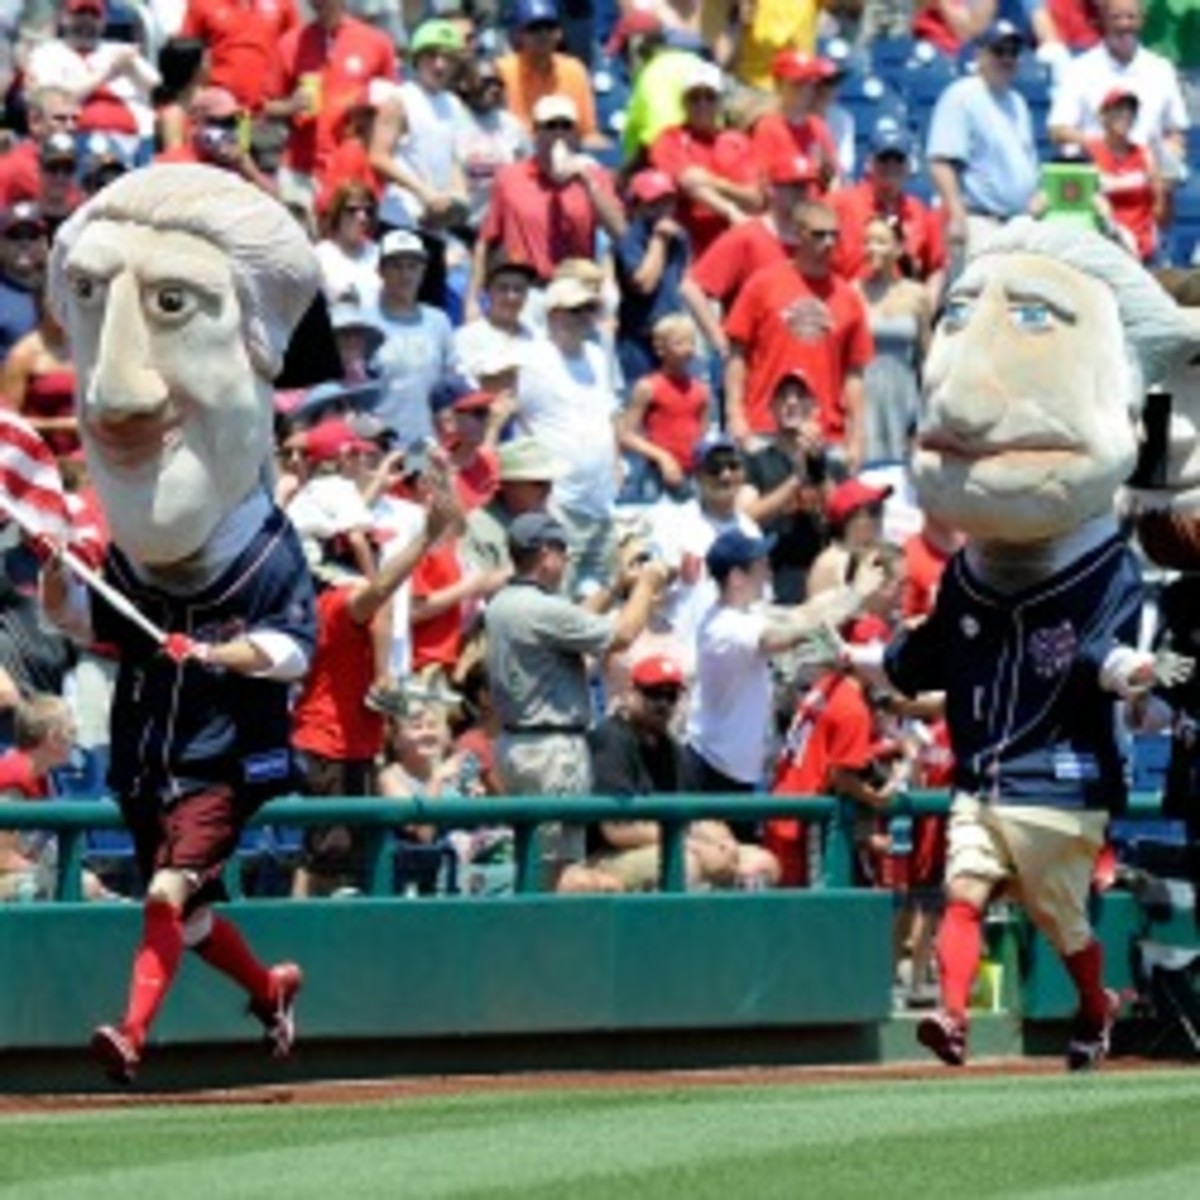 The Nationals' presidents' race occurs in the middle of the fourth inning of every home game. (Greg Fiume/Getty Images)